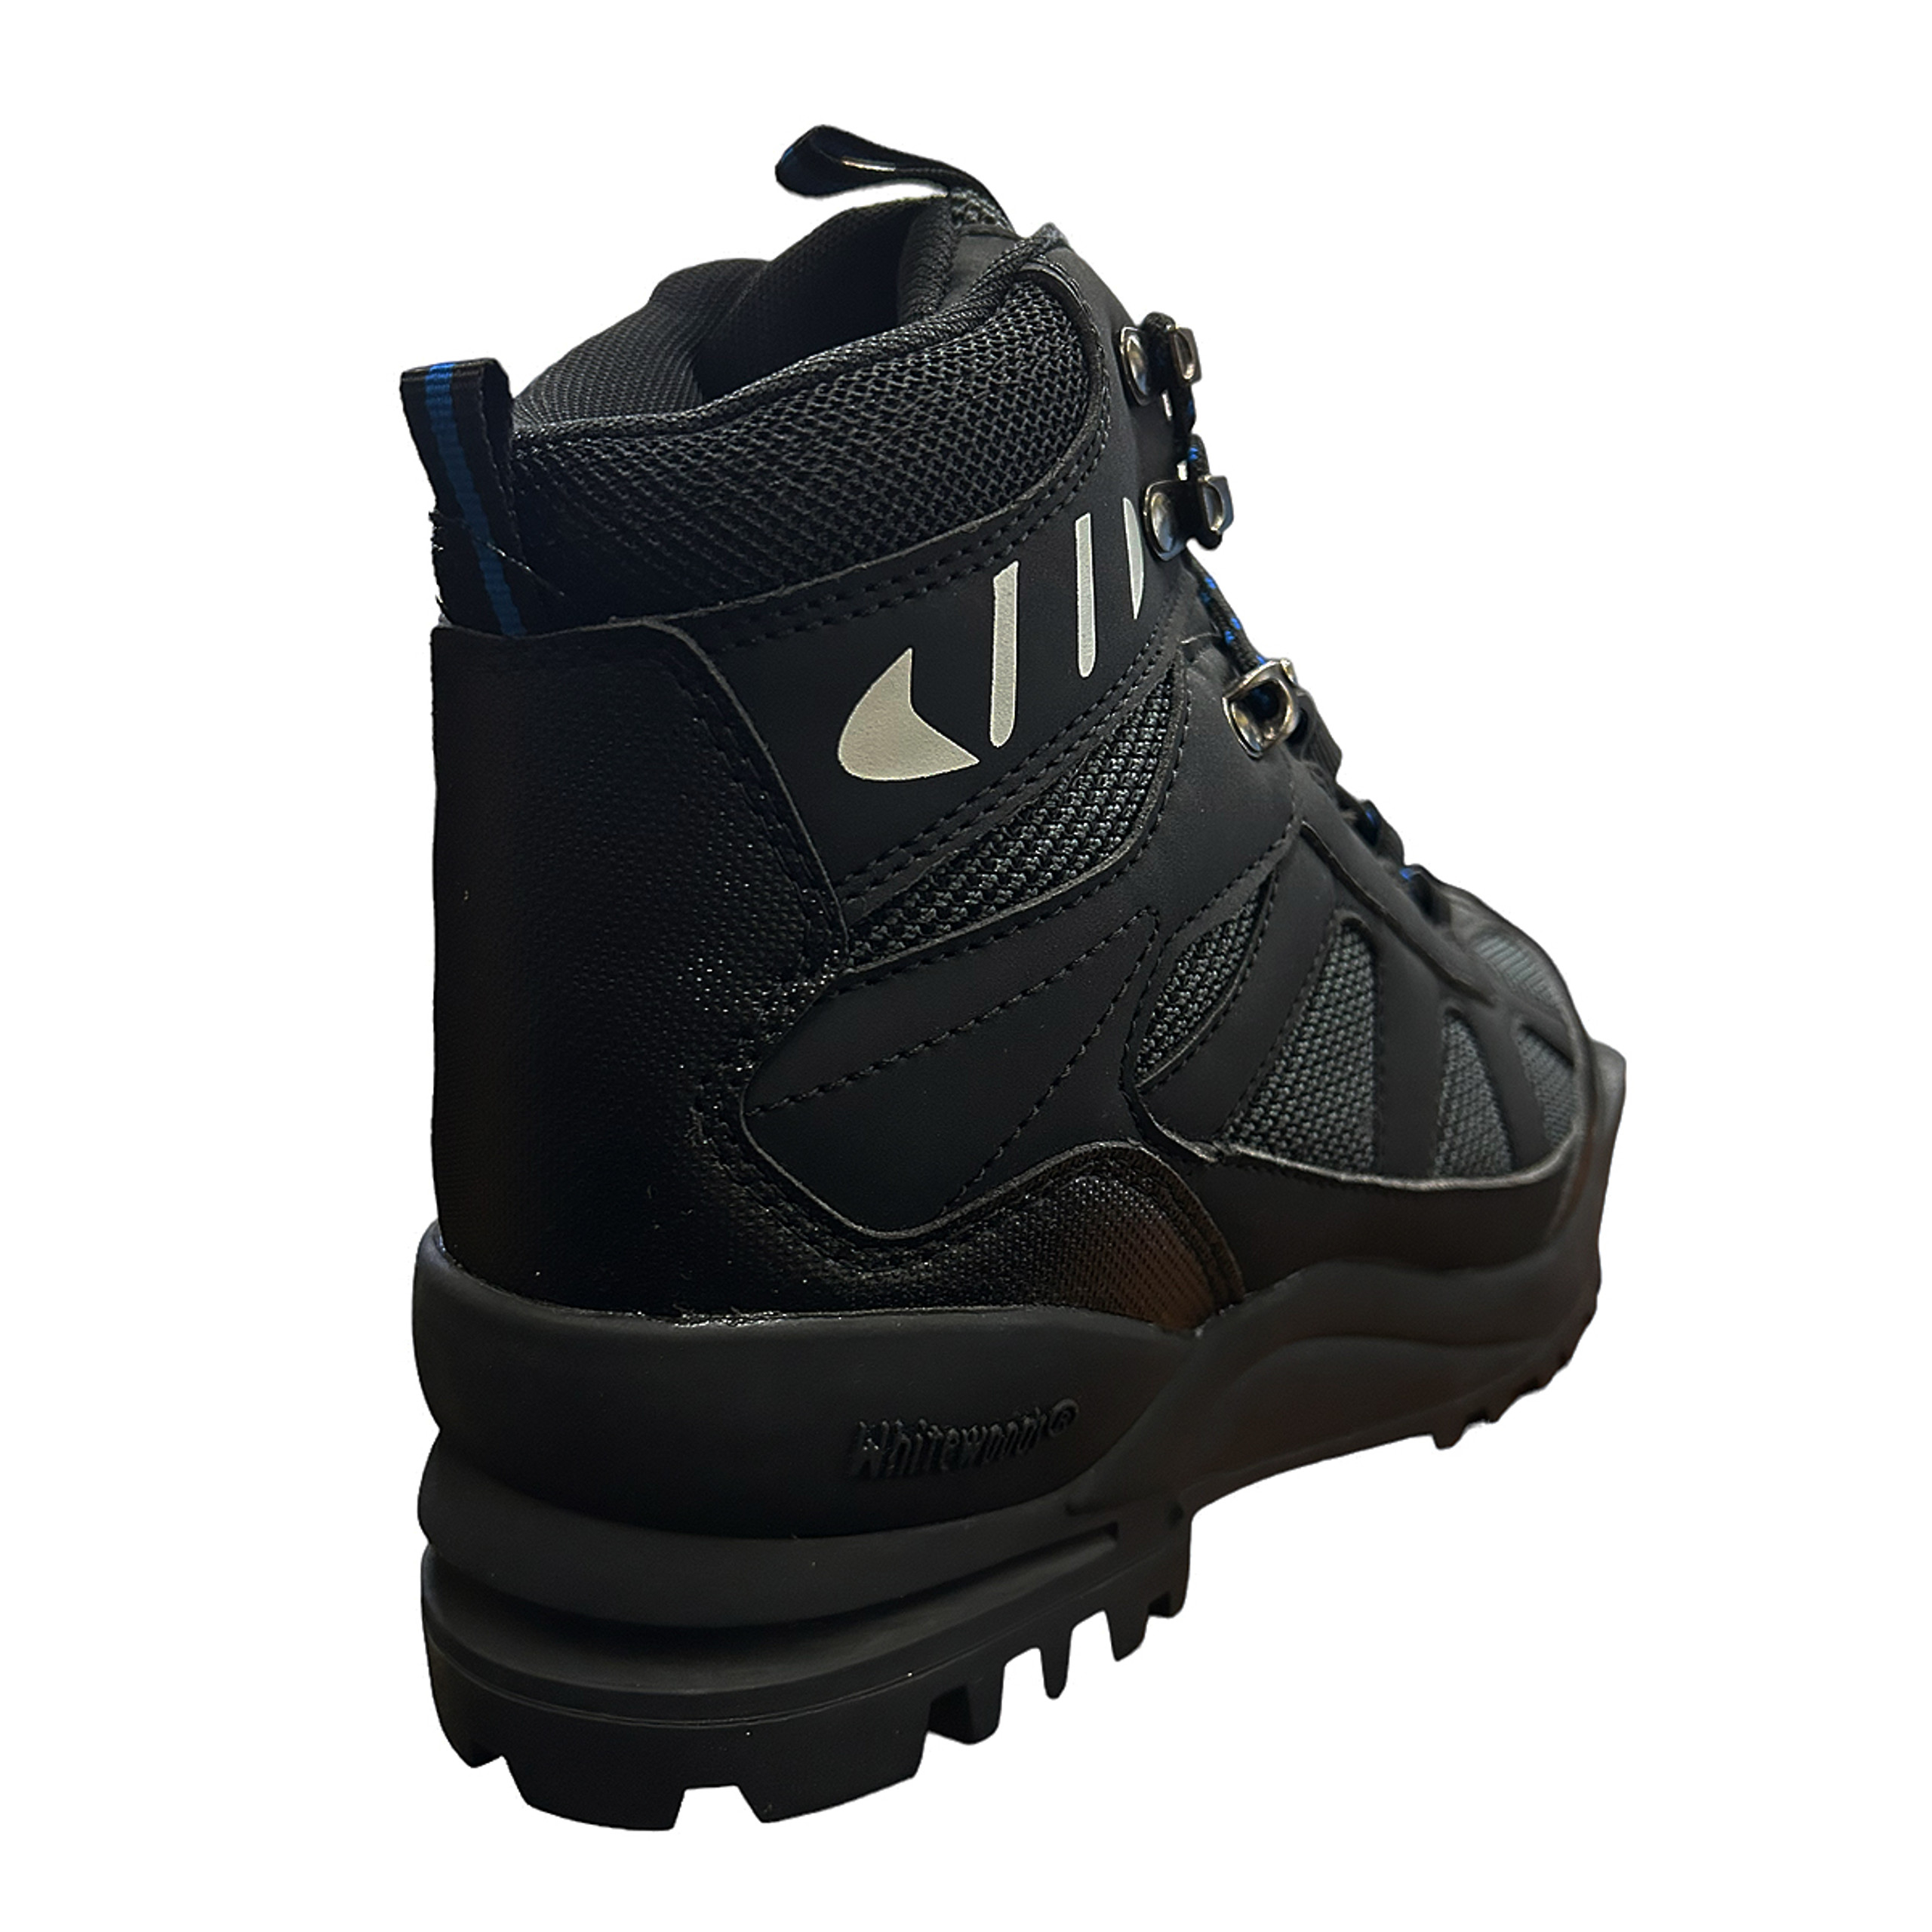 Whitewoods Model 301 75mm 3 Pin Cross Country Ski Boots - Black, Gray